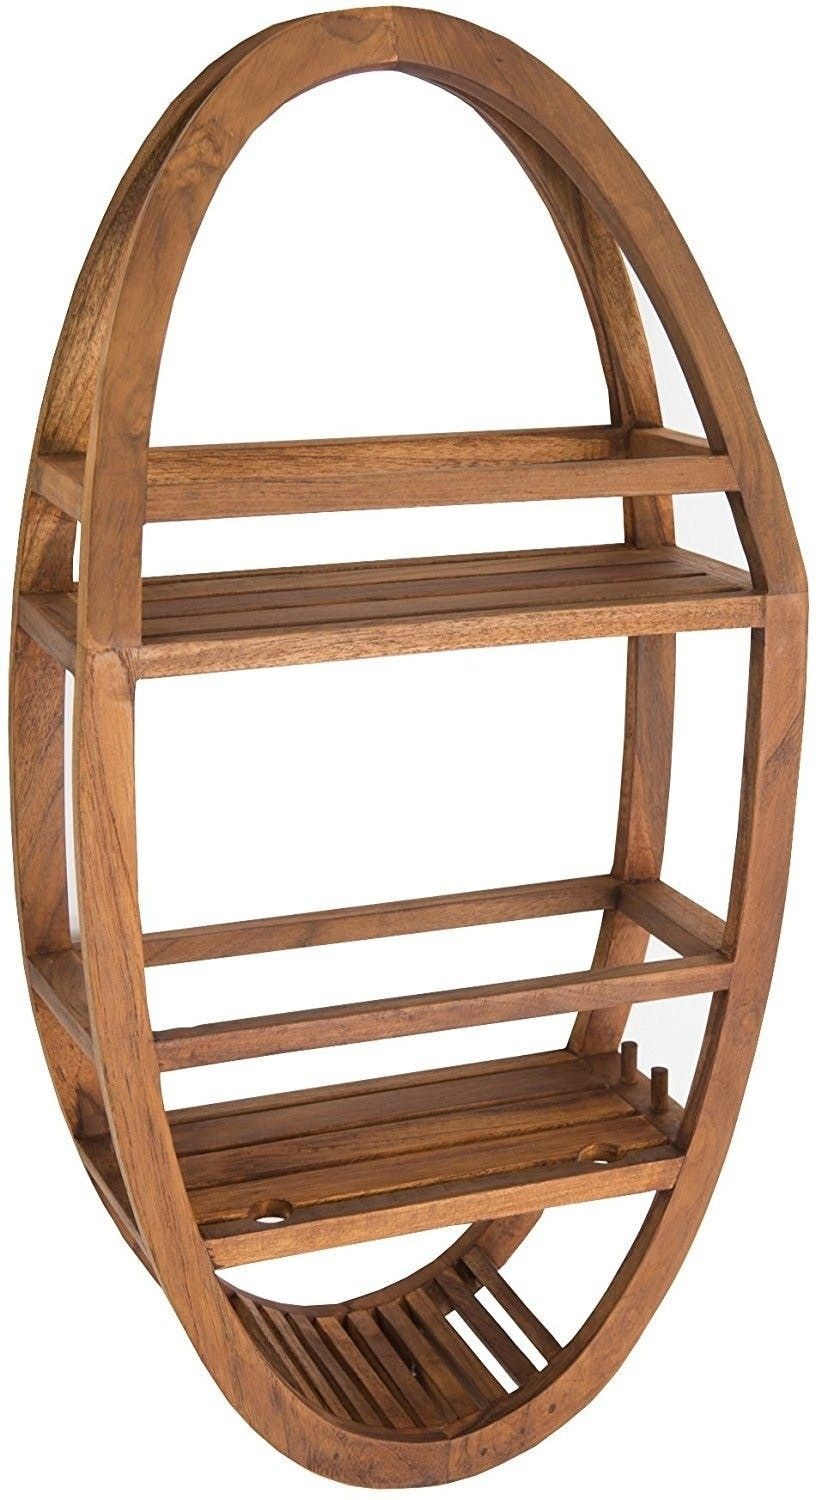 Teak Shower Organizer - From the Spa Collection